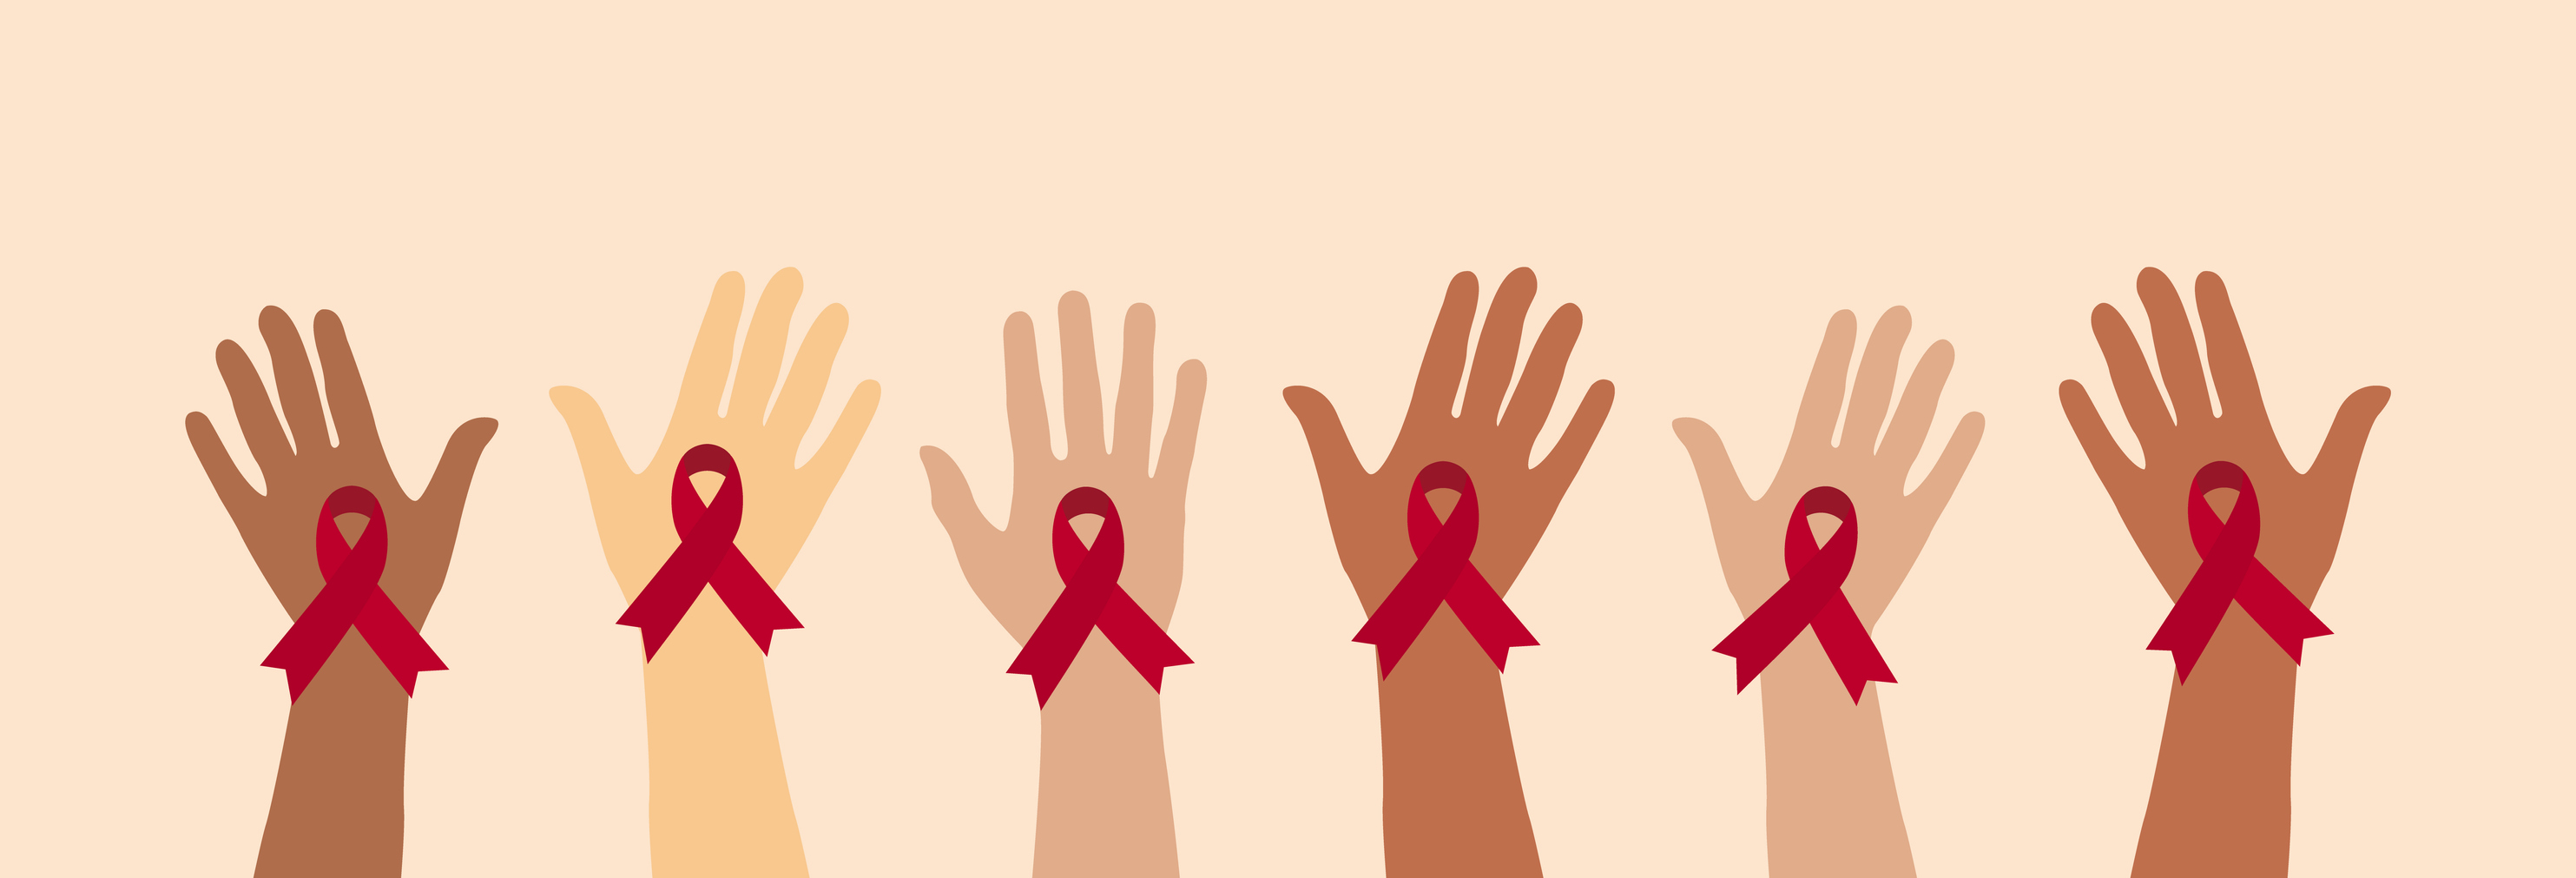 AIDs HIV awareness red ribbons. Human hands raised. 1st of December. Vector illustration